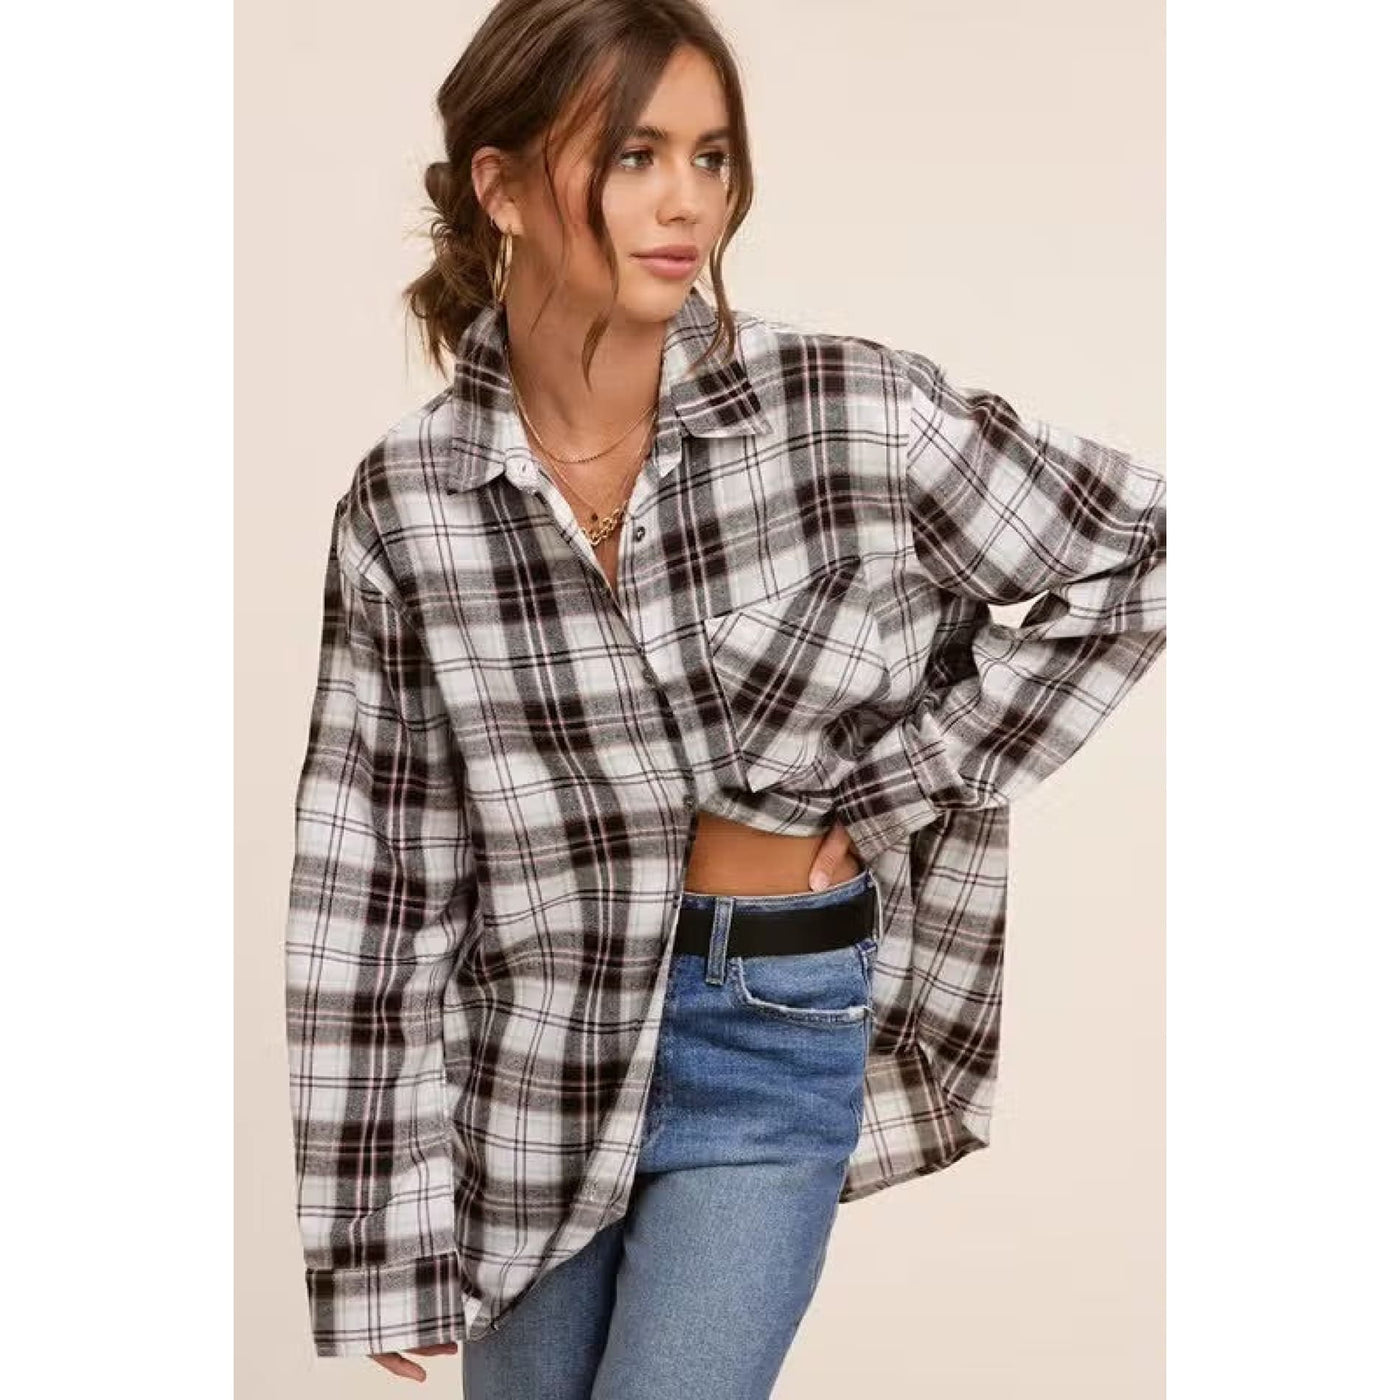 Through The Maze Flannel Top - S / Black / 0130 - 120 Long Sleeve Tops